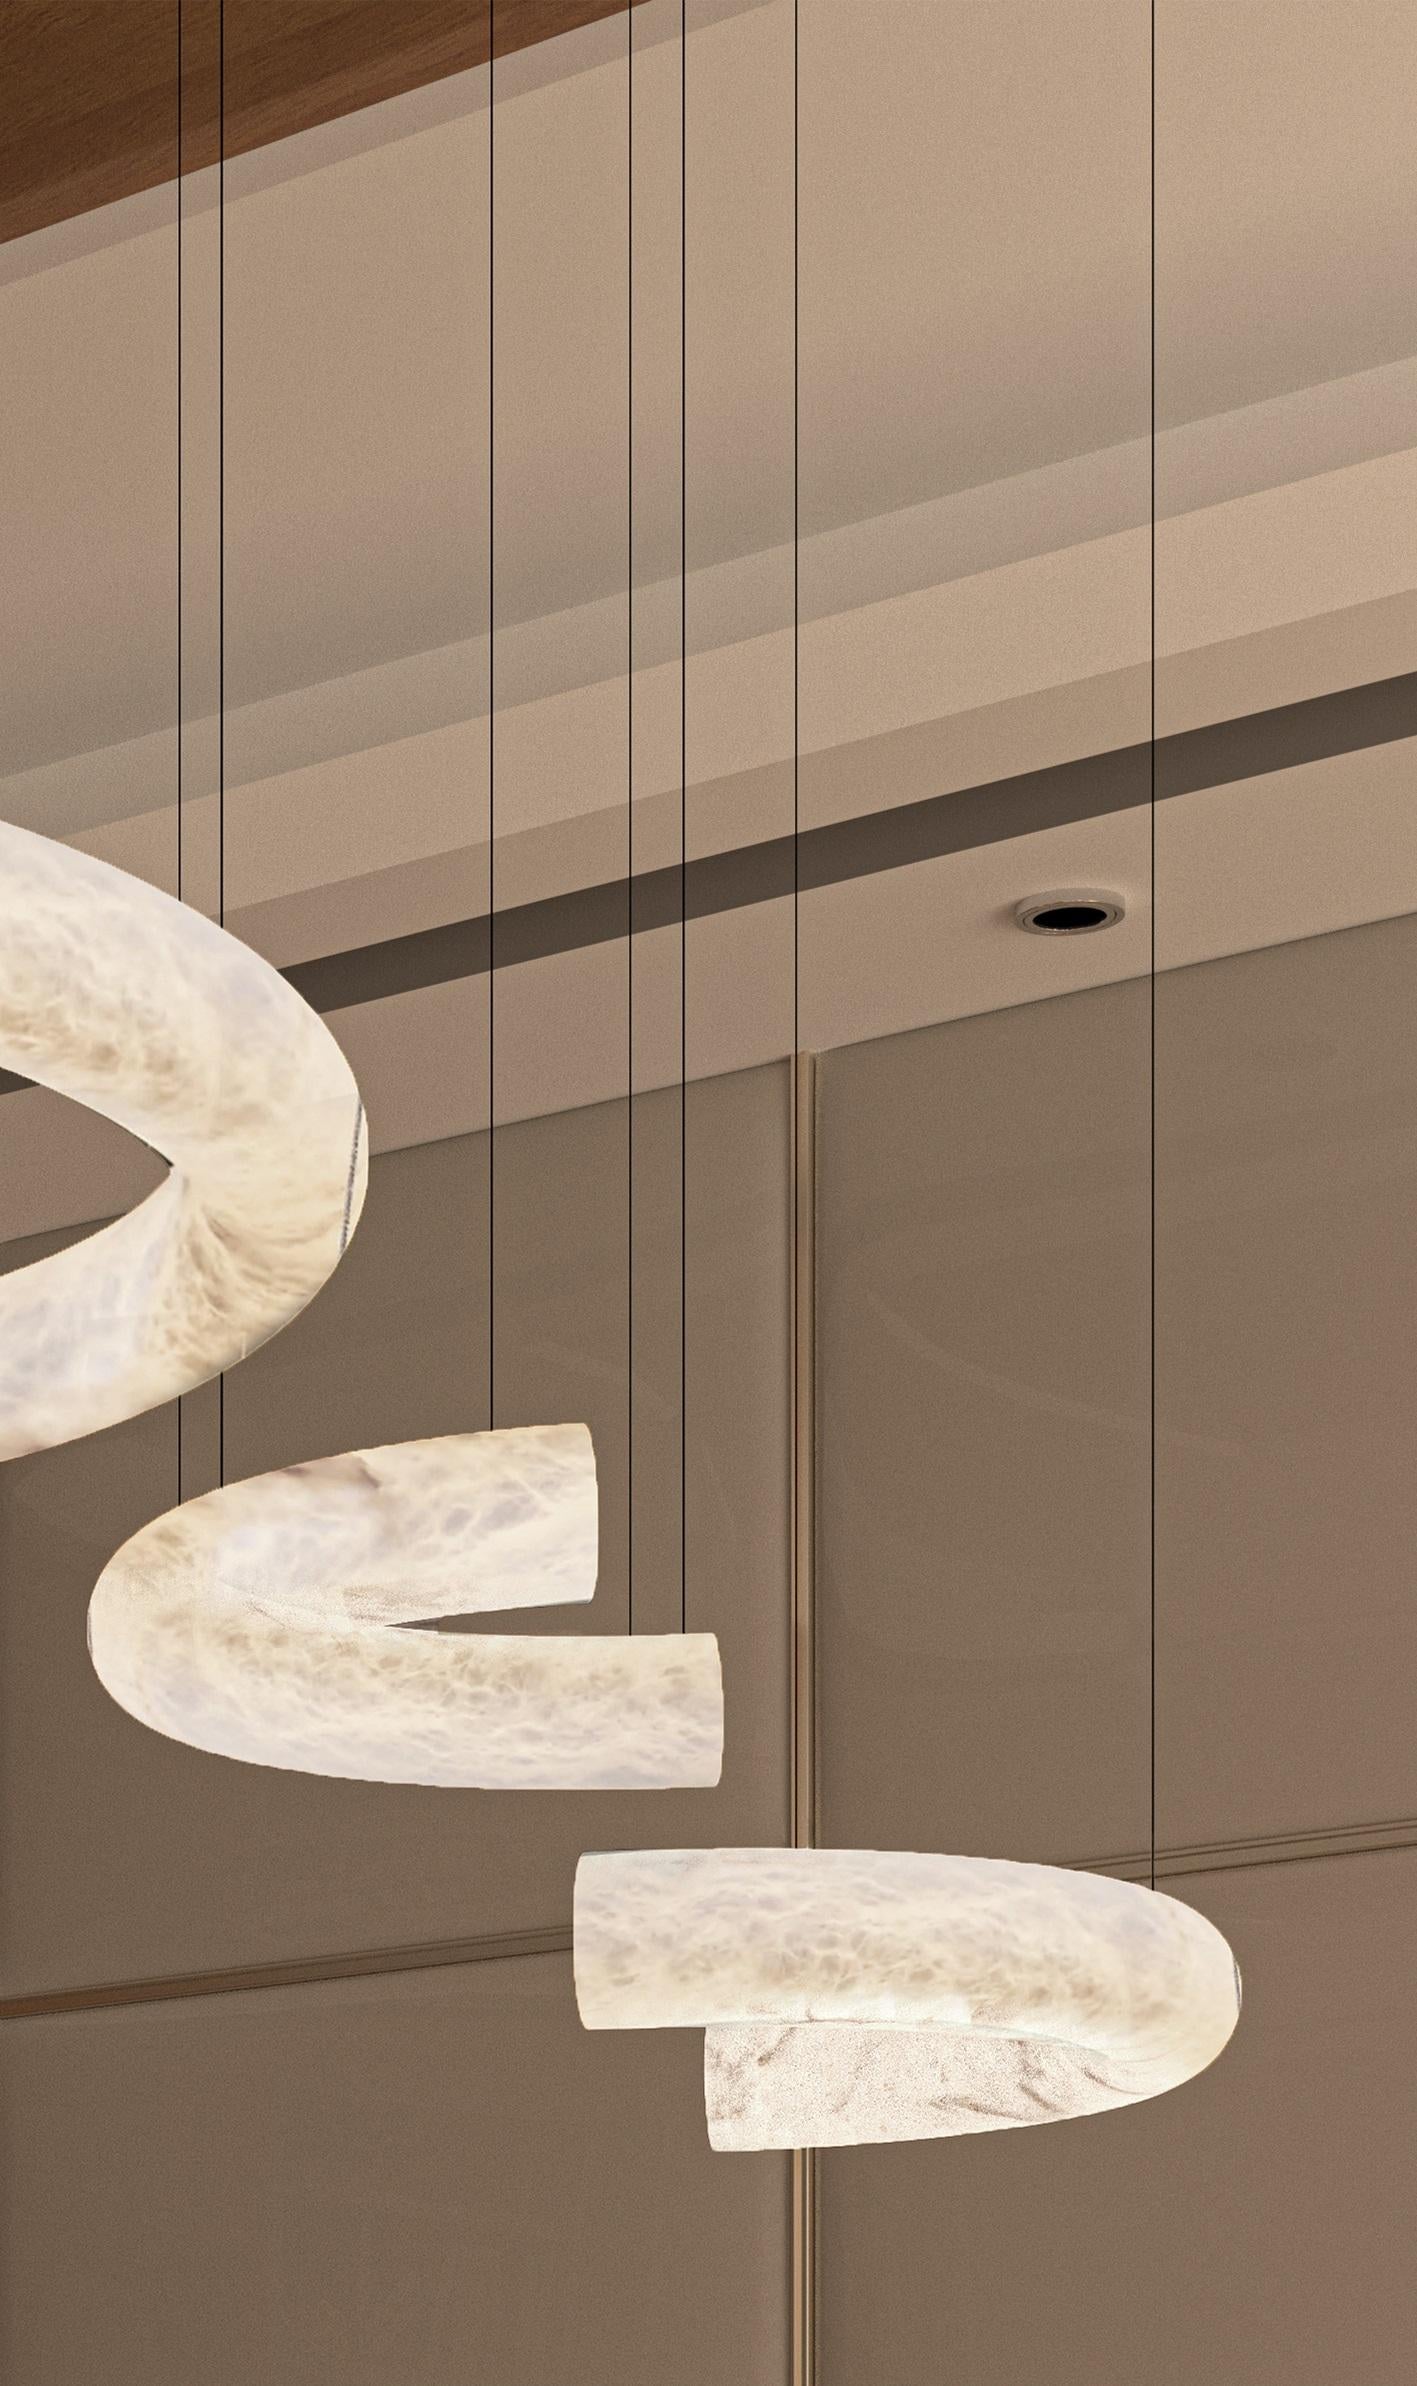 Futatsu Small Suspension Lamp by Alabastro Italiano
Dimensions: Ø 56 x H 200 cm.
Materials: White alabaster and metal.

Available in different finishes: Shiny Silver, Bronze, Brushed Brass, Ruggine of Florence, Brushed Burnished, Shiny Gold, Brushed